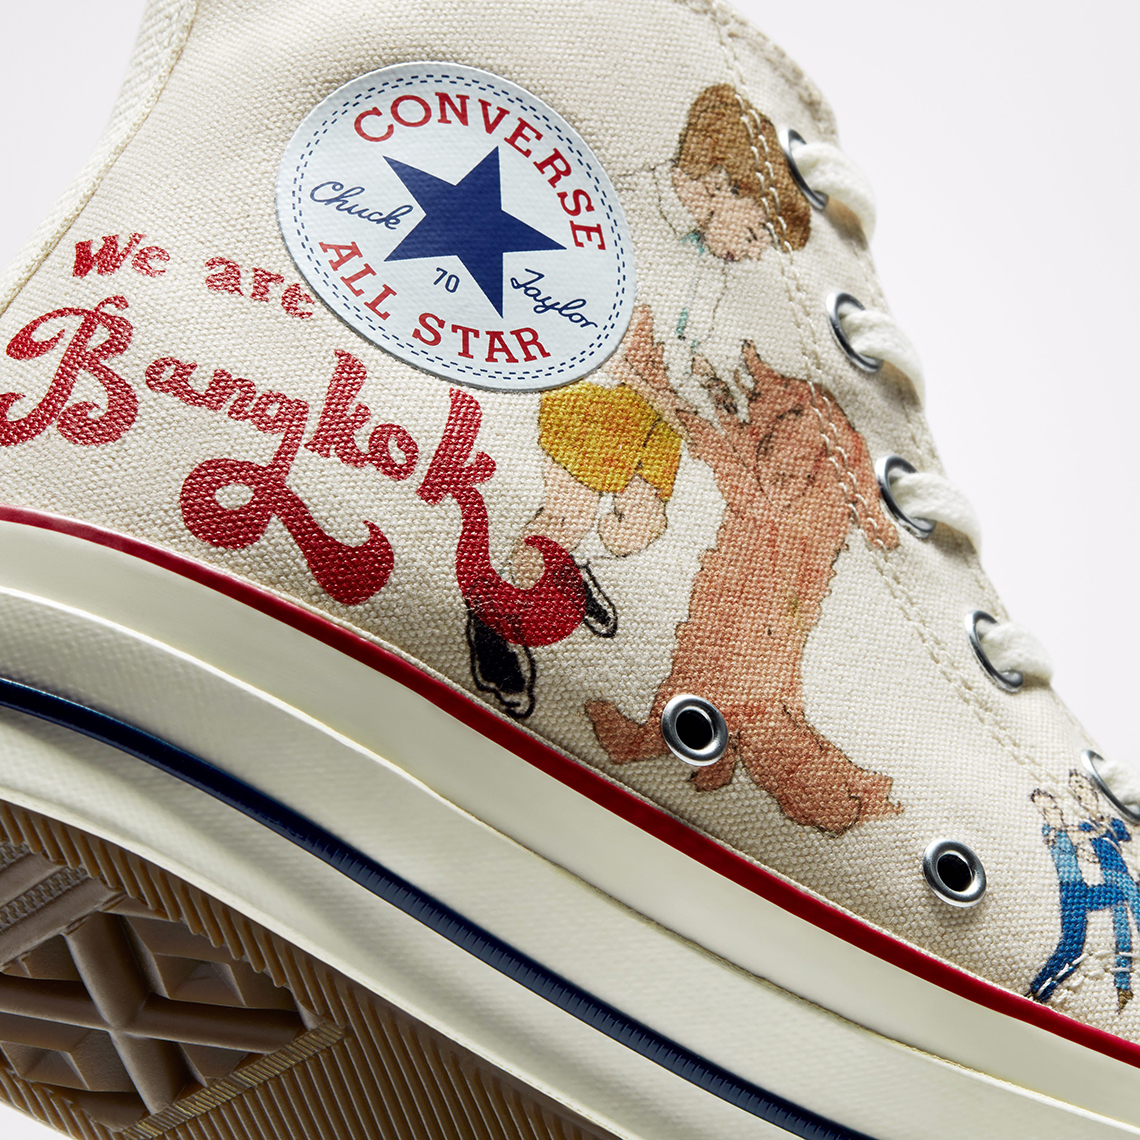 Converse Artist Series Chuck 70 On White Release Date 3